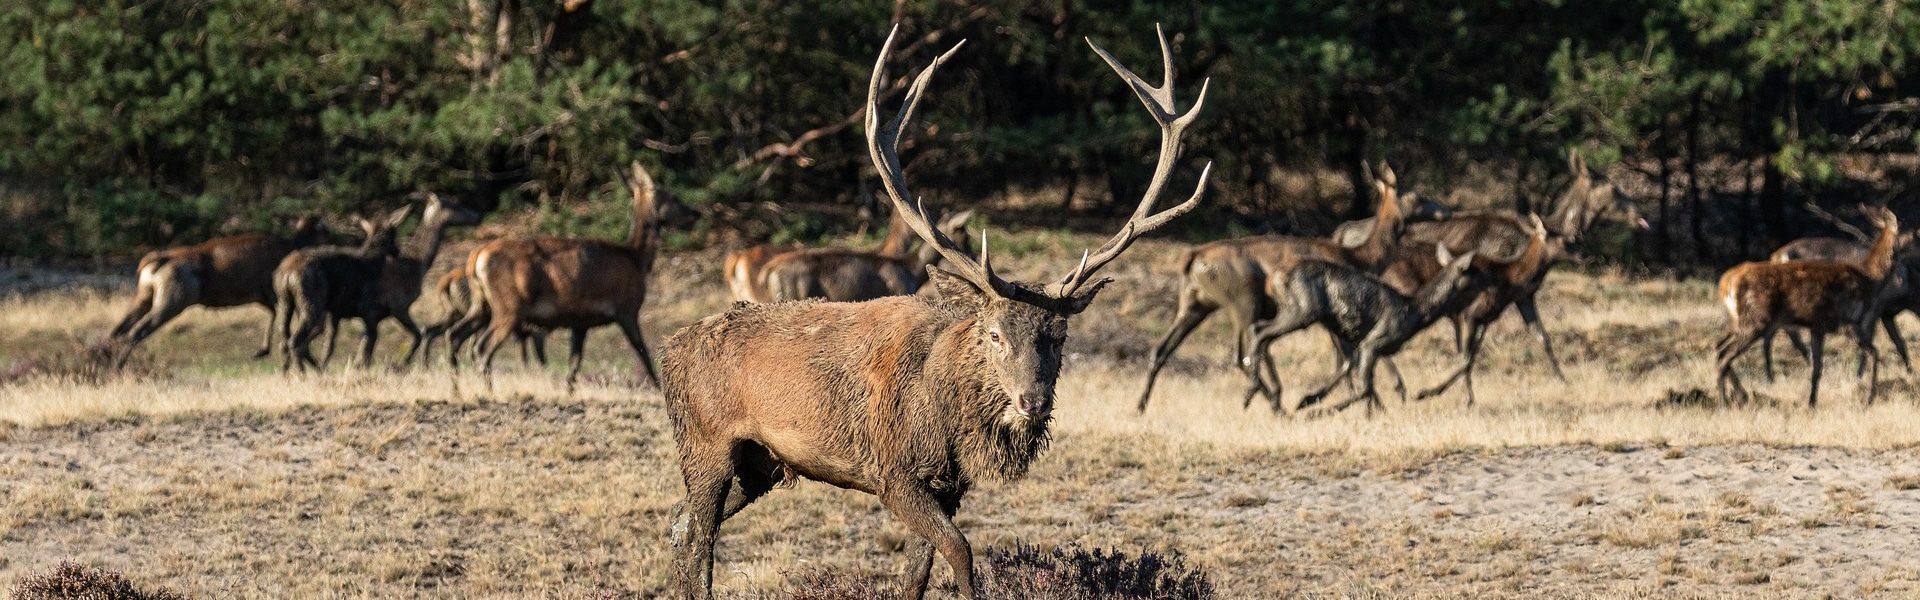 A red deer stag in front of a herd